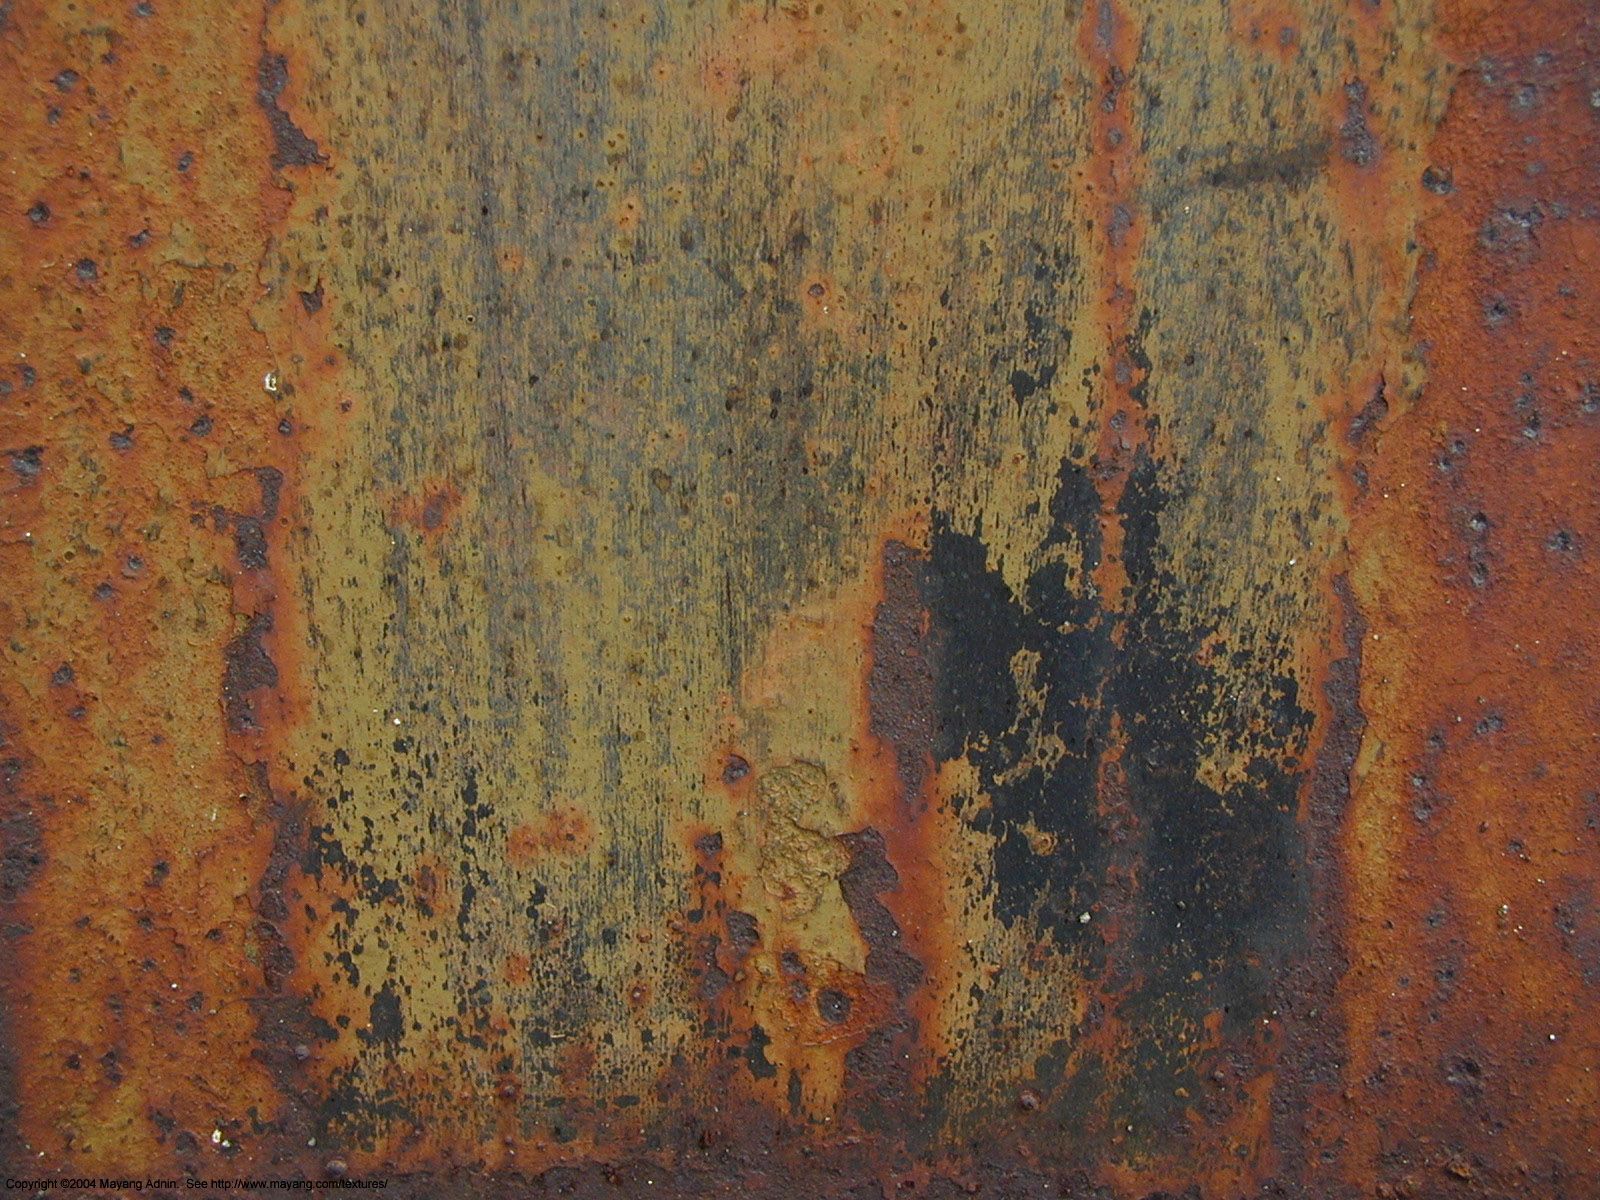 rusty steel - Google-Suche | Surface | Pinterest | Rusted metal